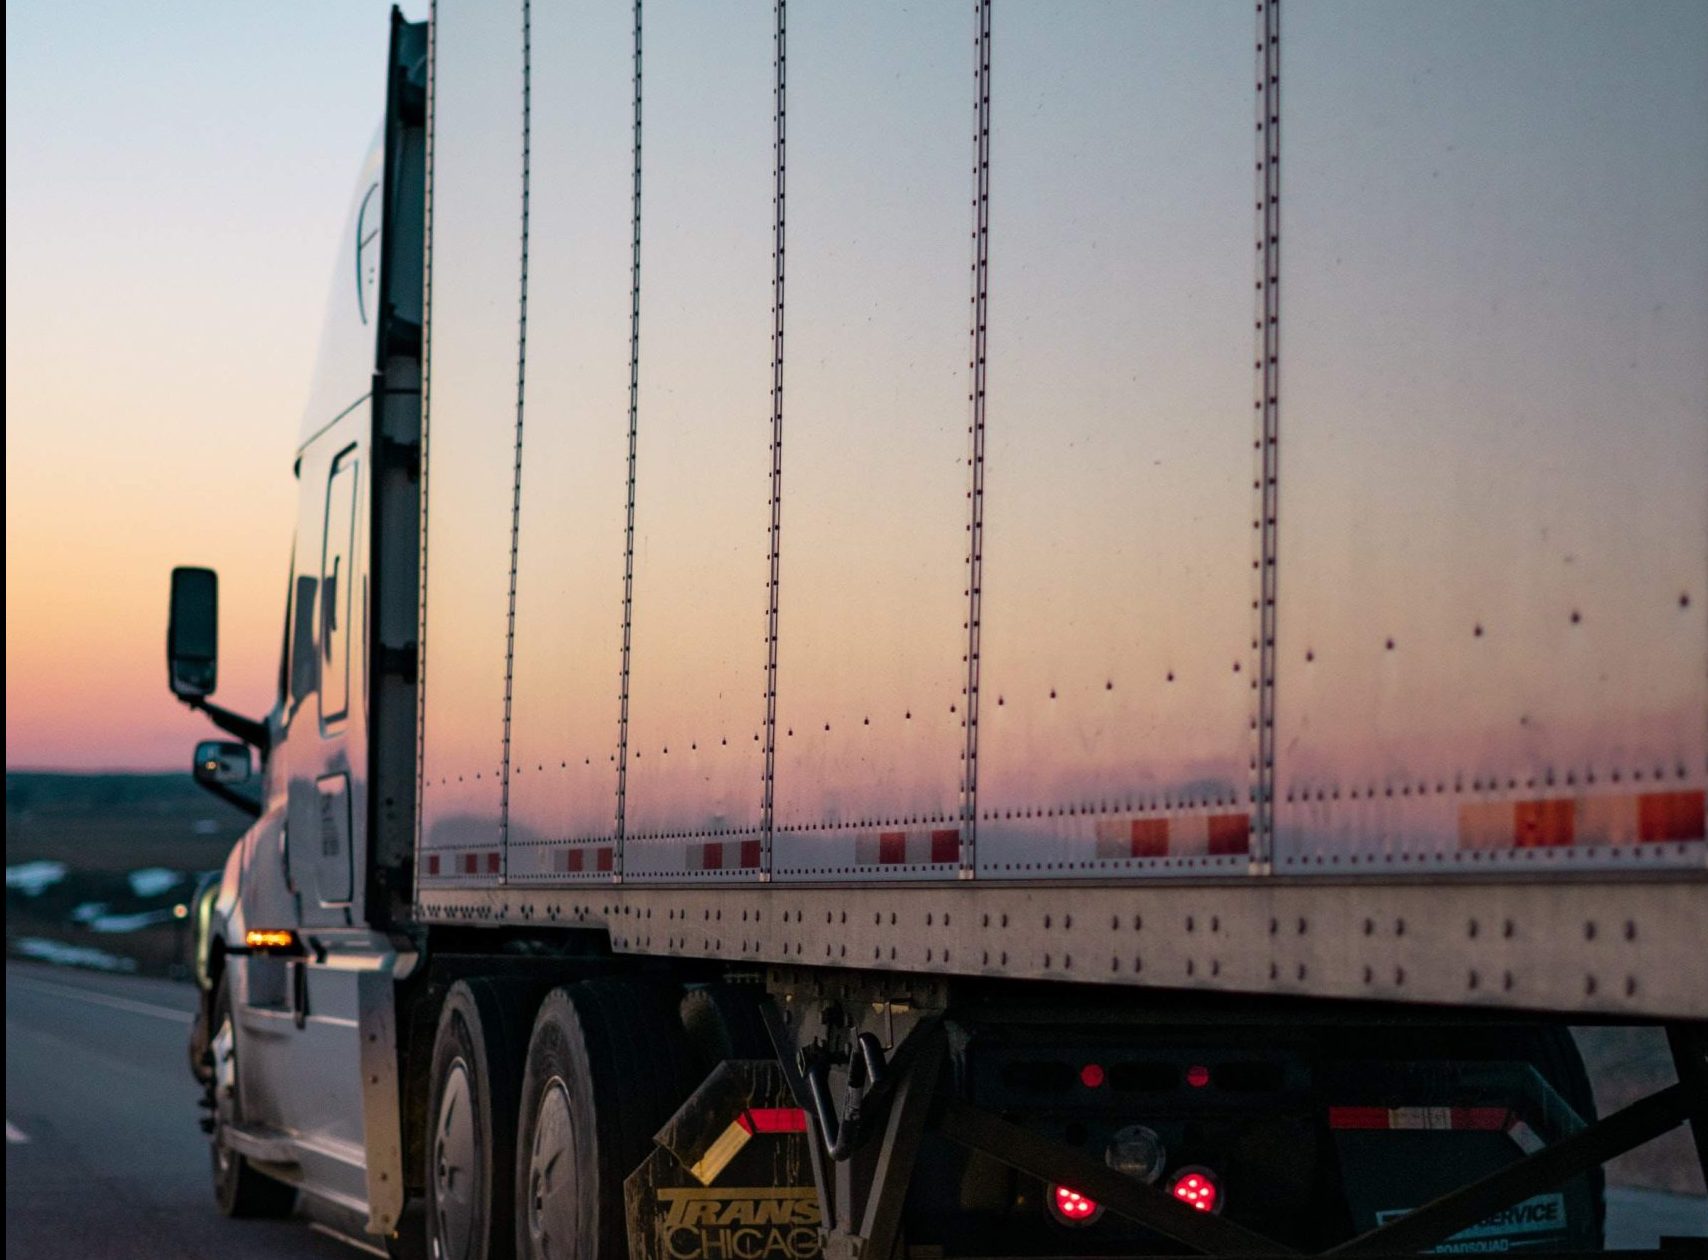 COVID Is A Mighty Threat, But Truckers Don’t Need the Vaccine Mandate